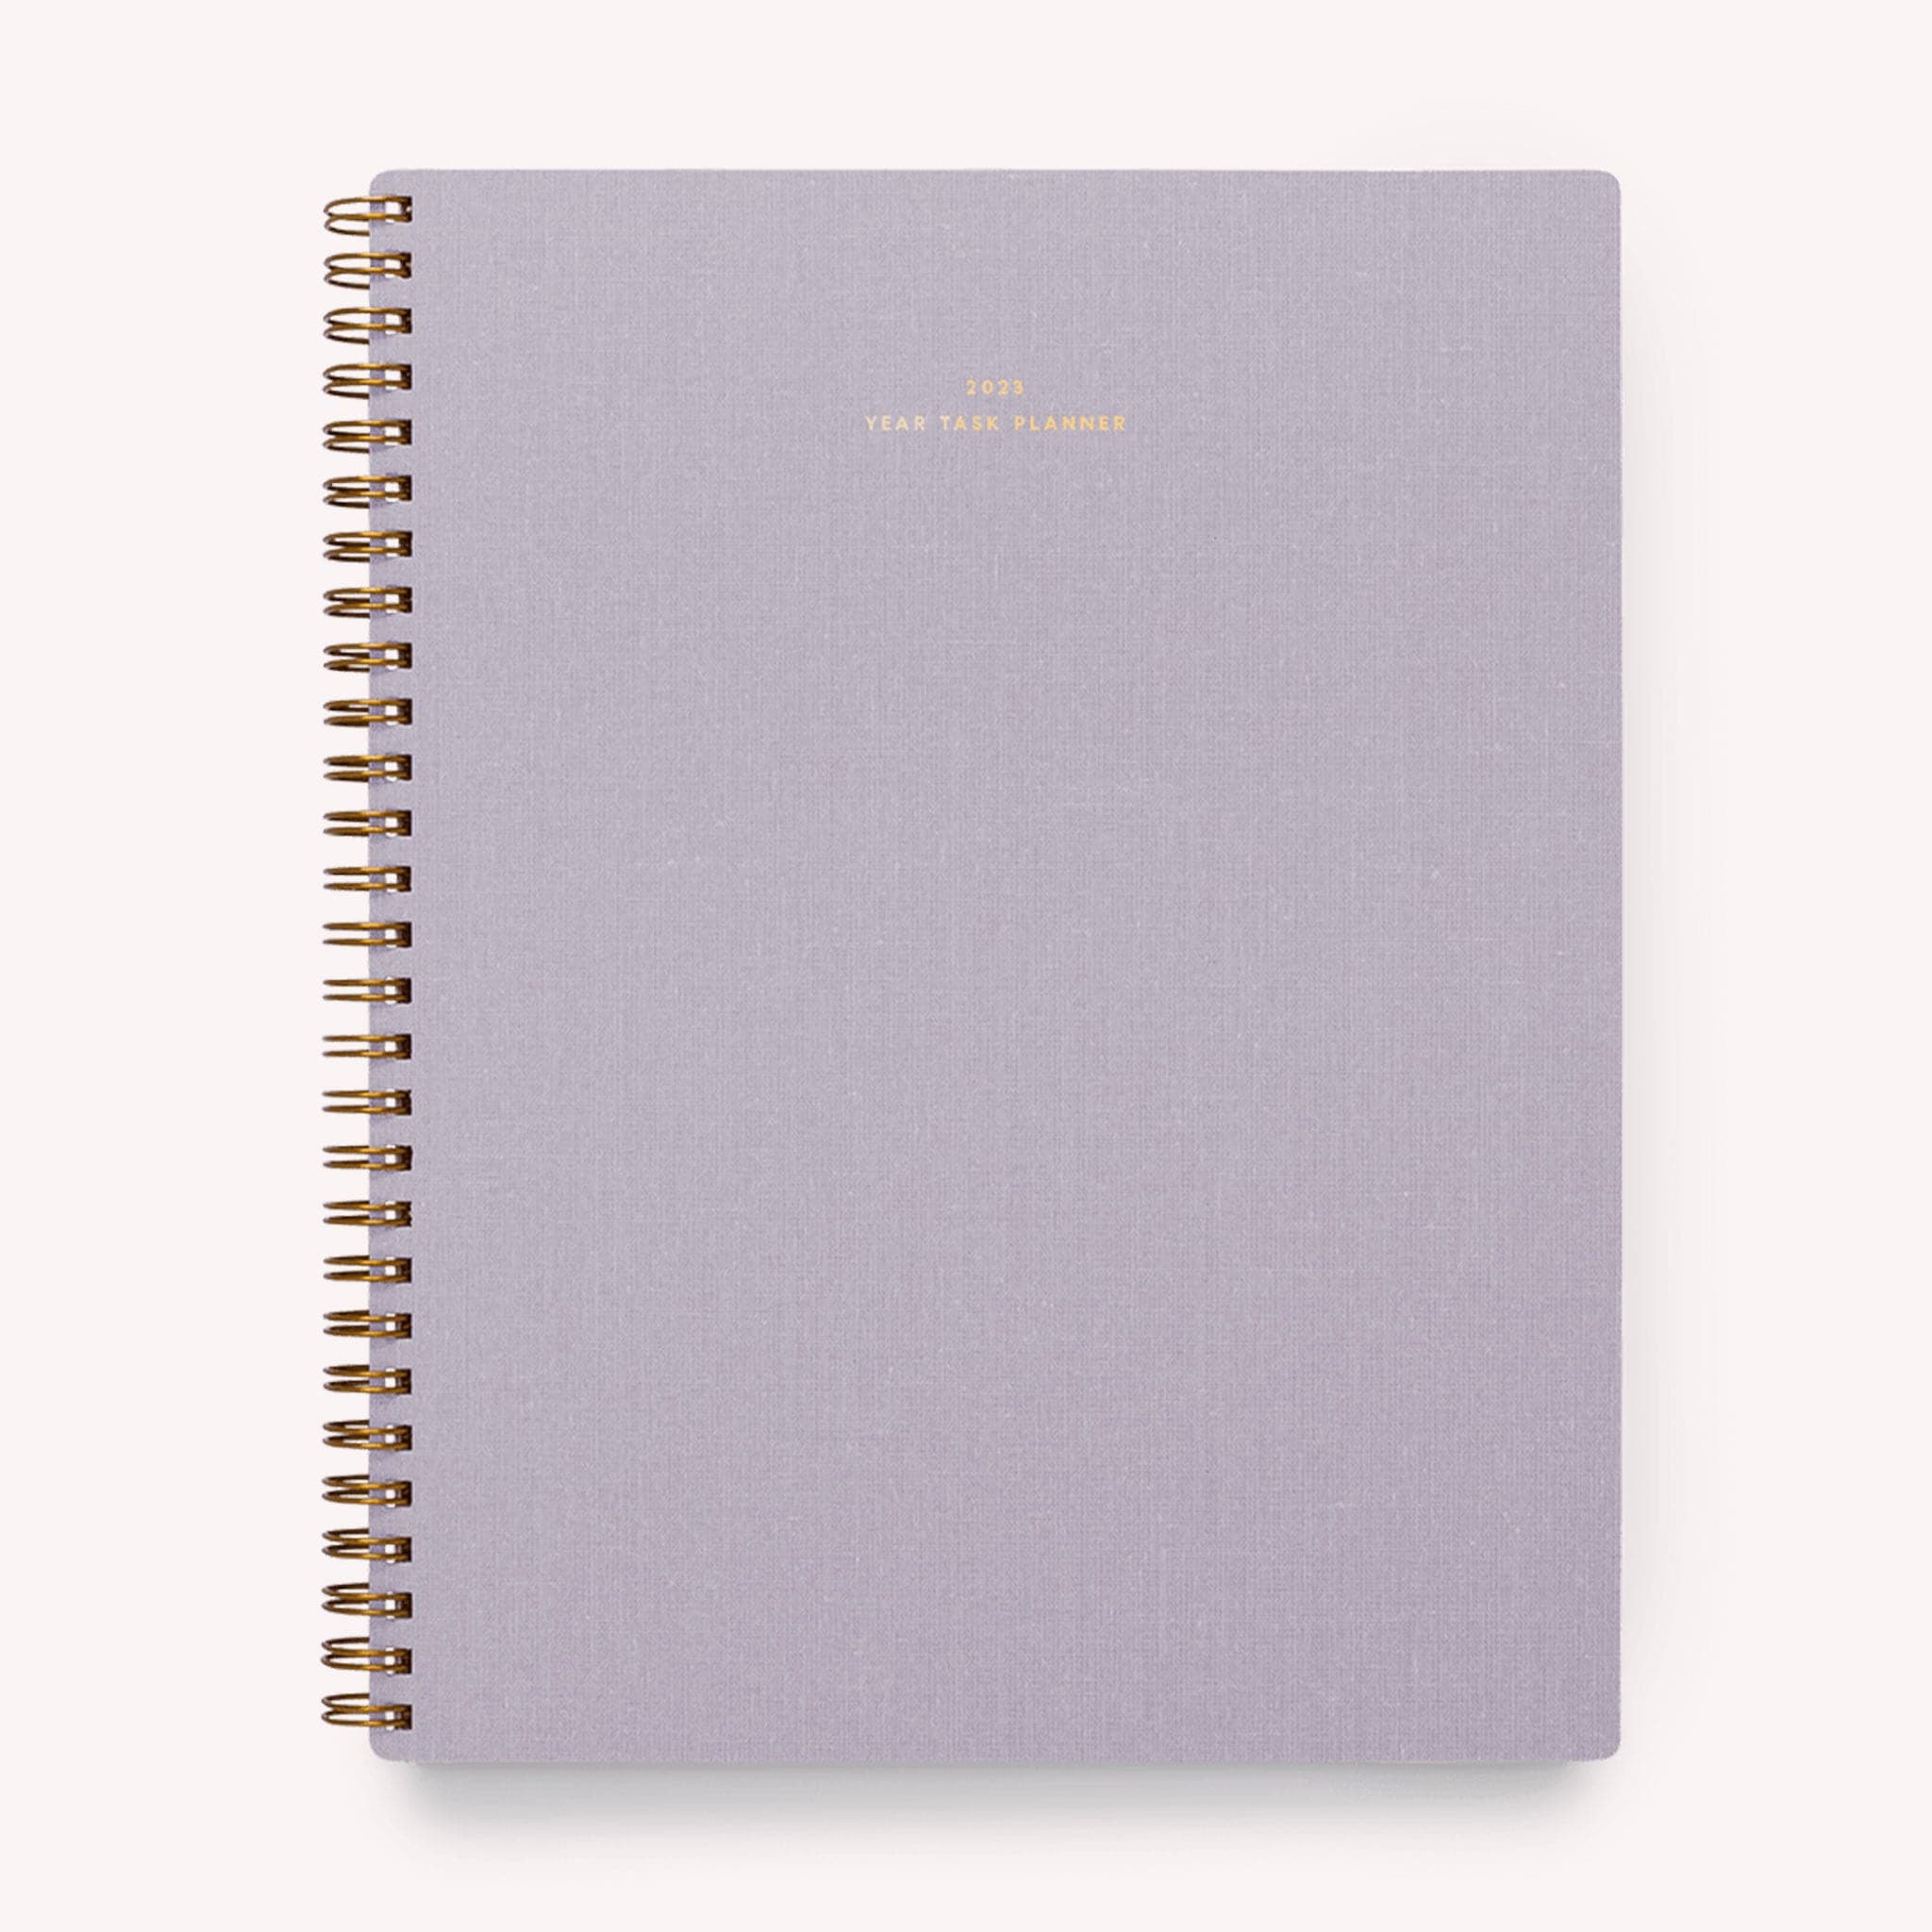 A lavender yearly planner that&#39;s gold spiral bound.